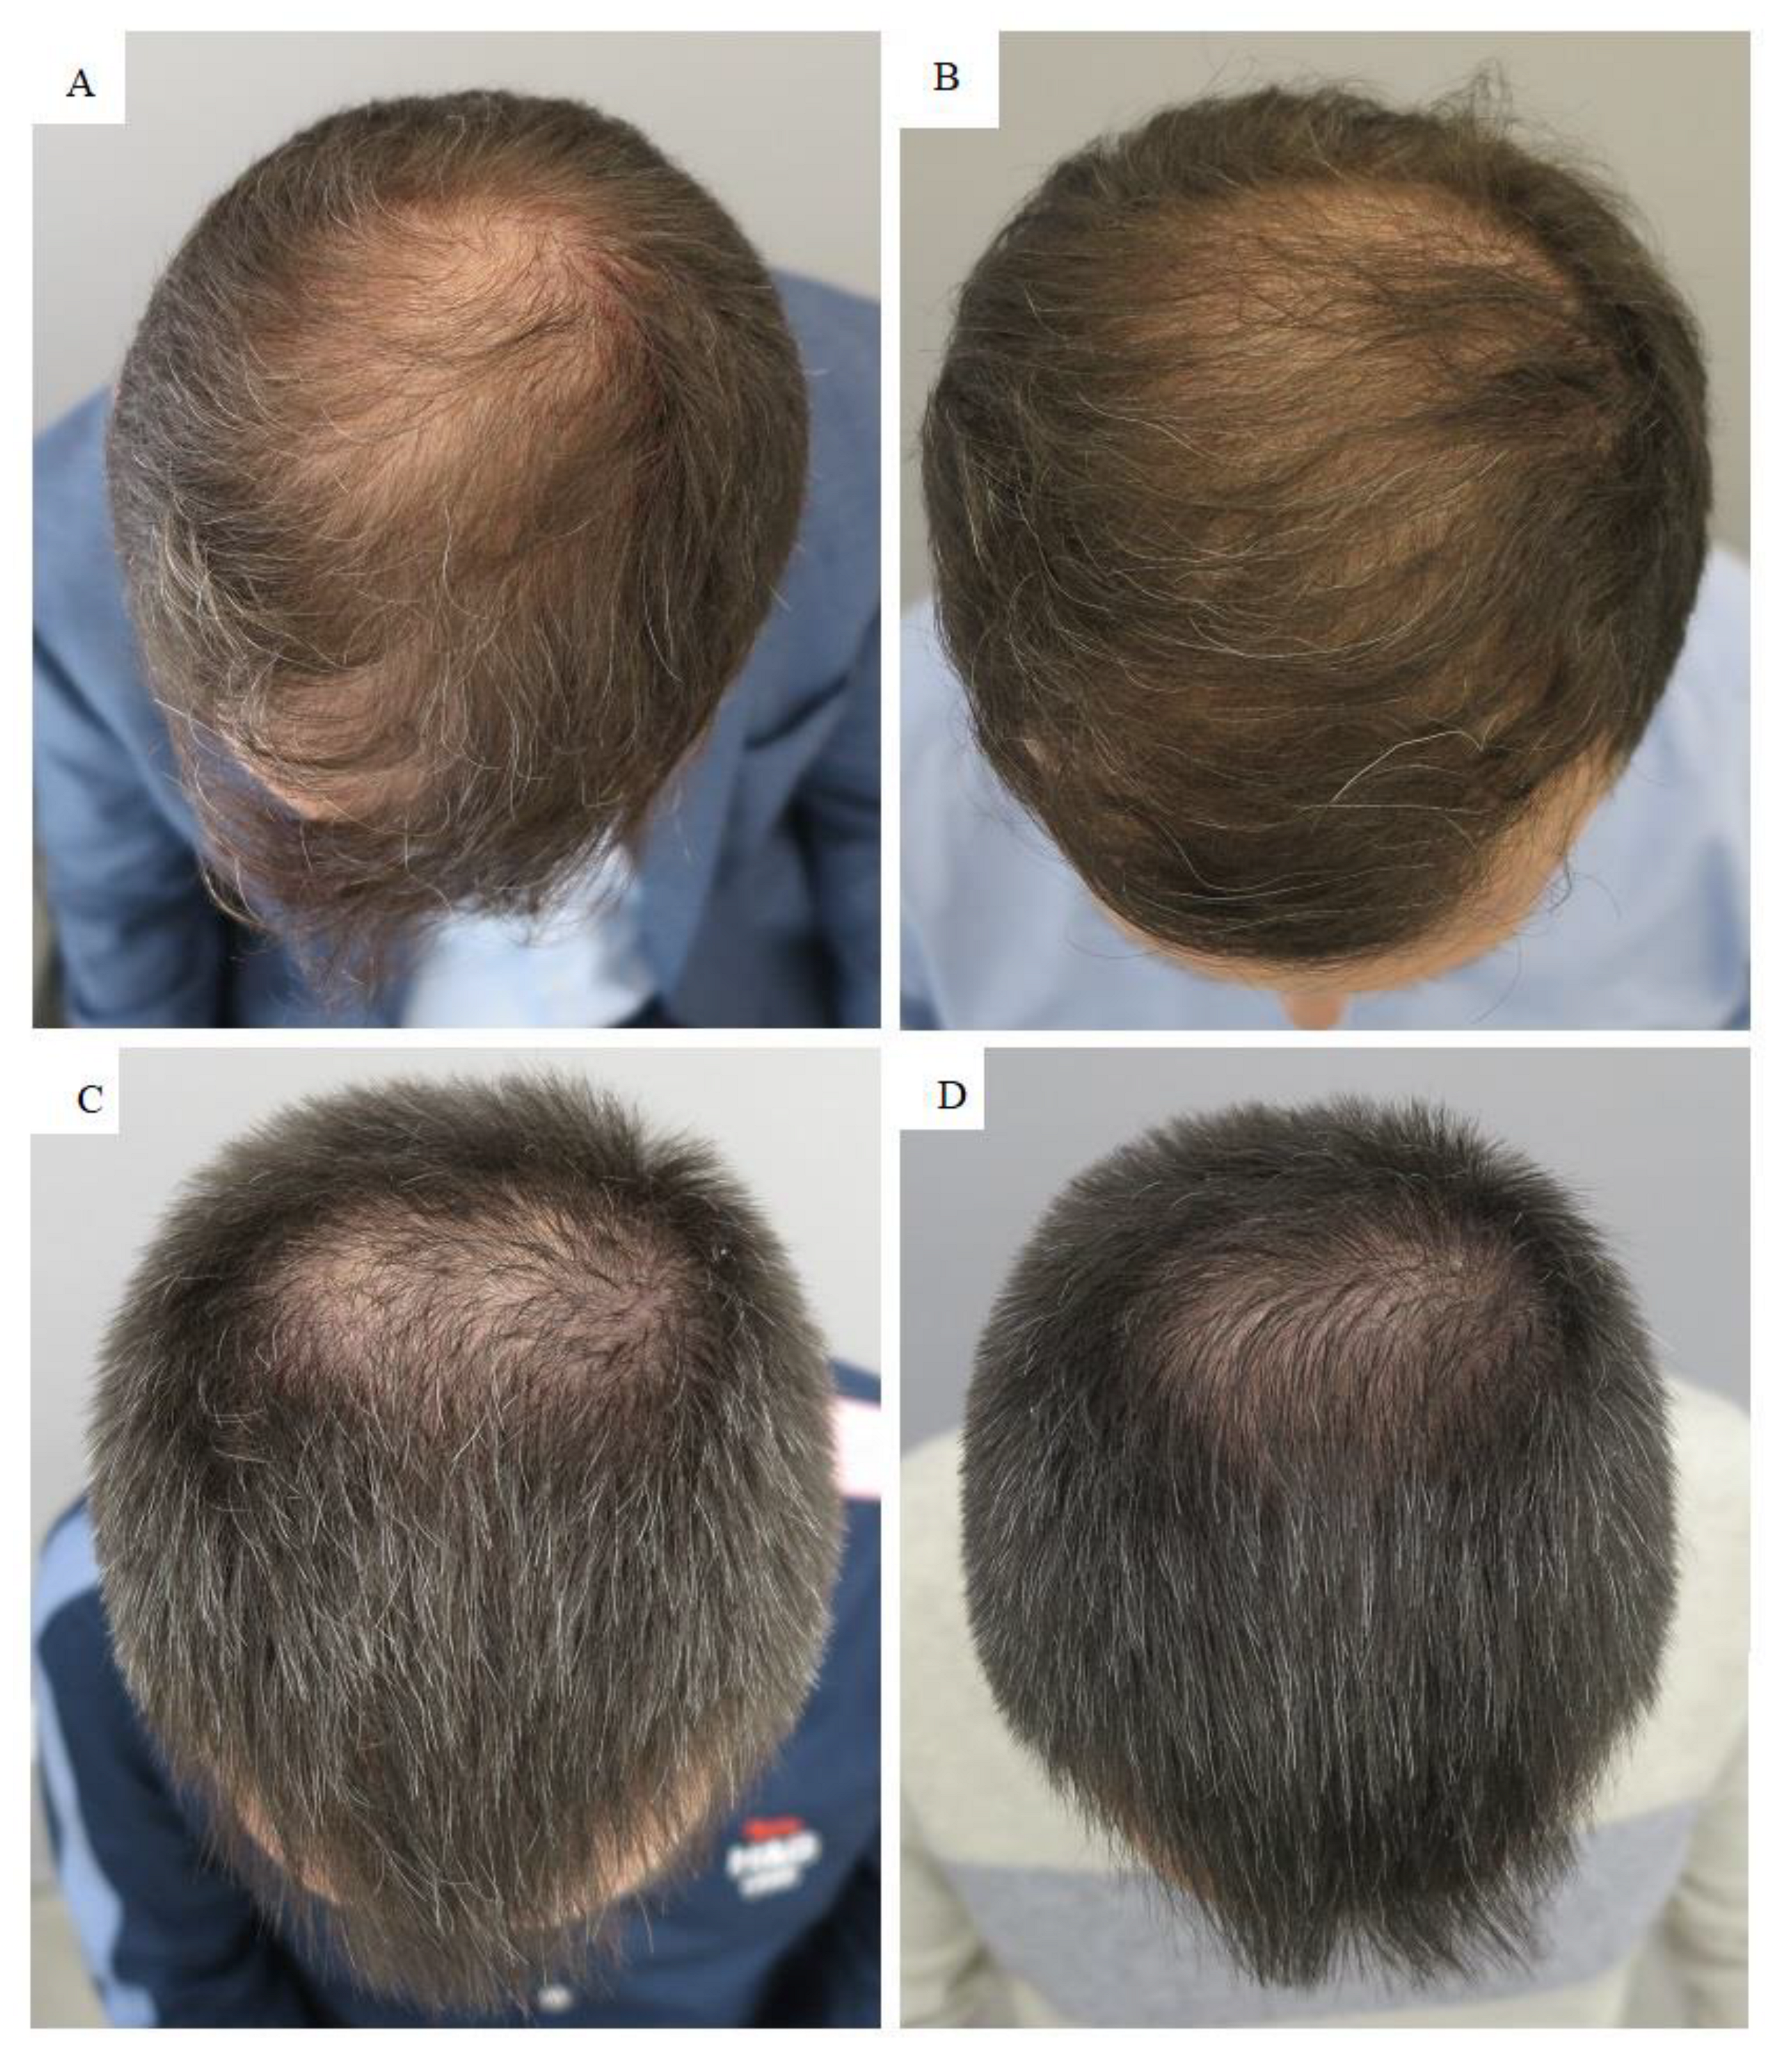 metallisk vride Piping JCM | Free Full-Text | Autologous Platelet-Rich Plasma (PRP) for Treating  Androgenetic Alopecia: A Novel Treatment Protocol Standardized on 2 Cases